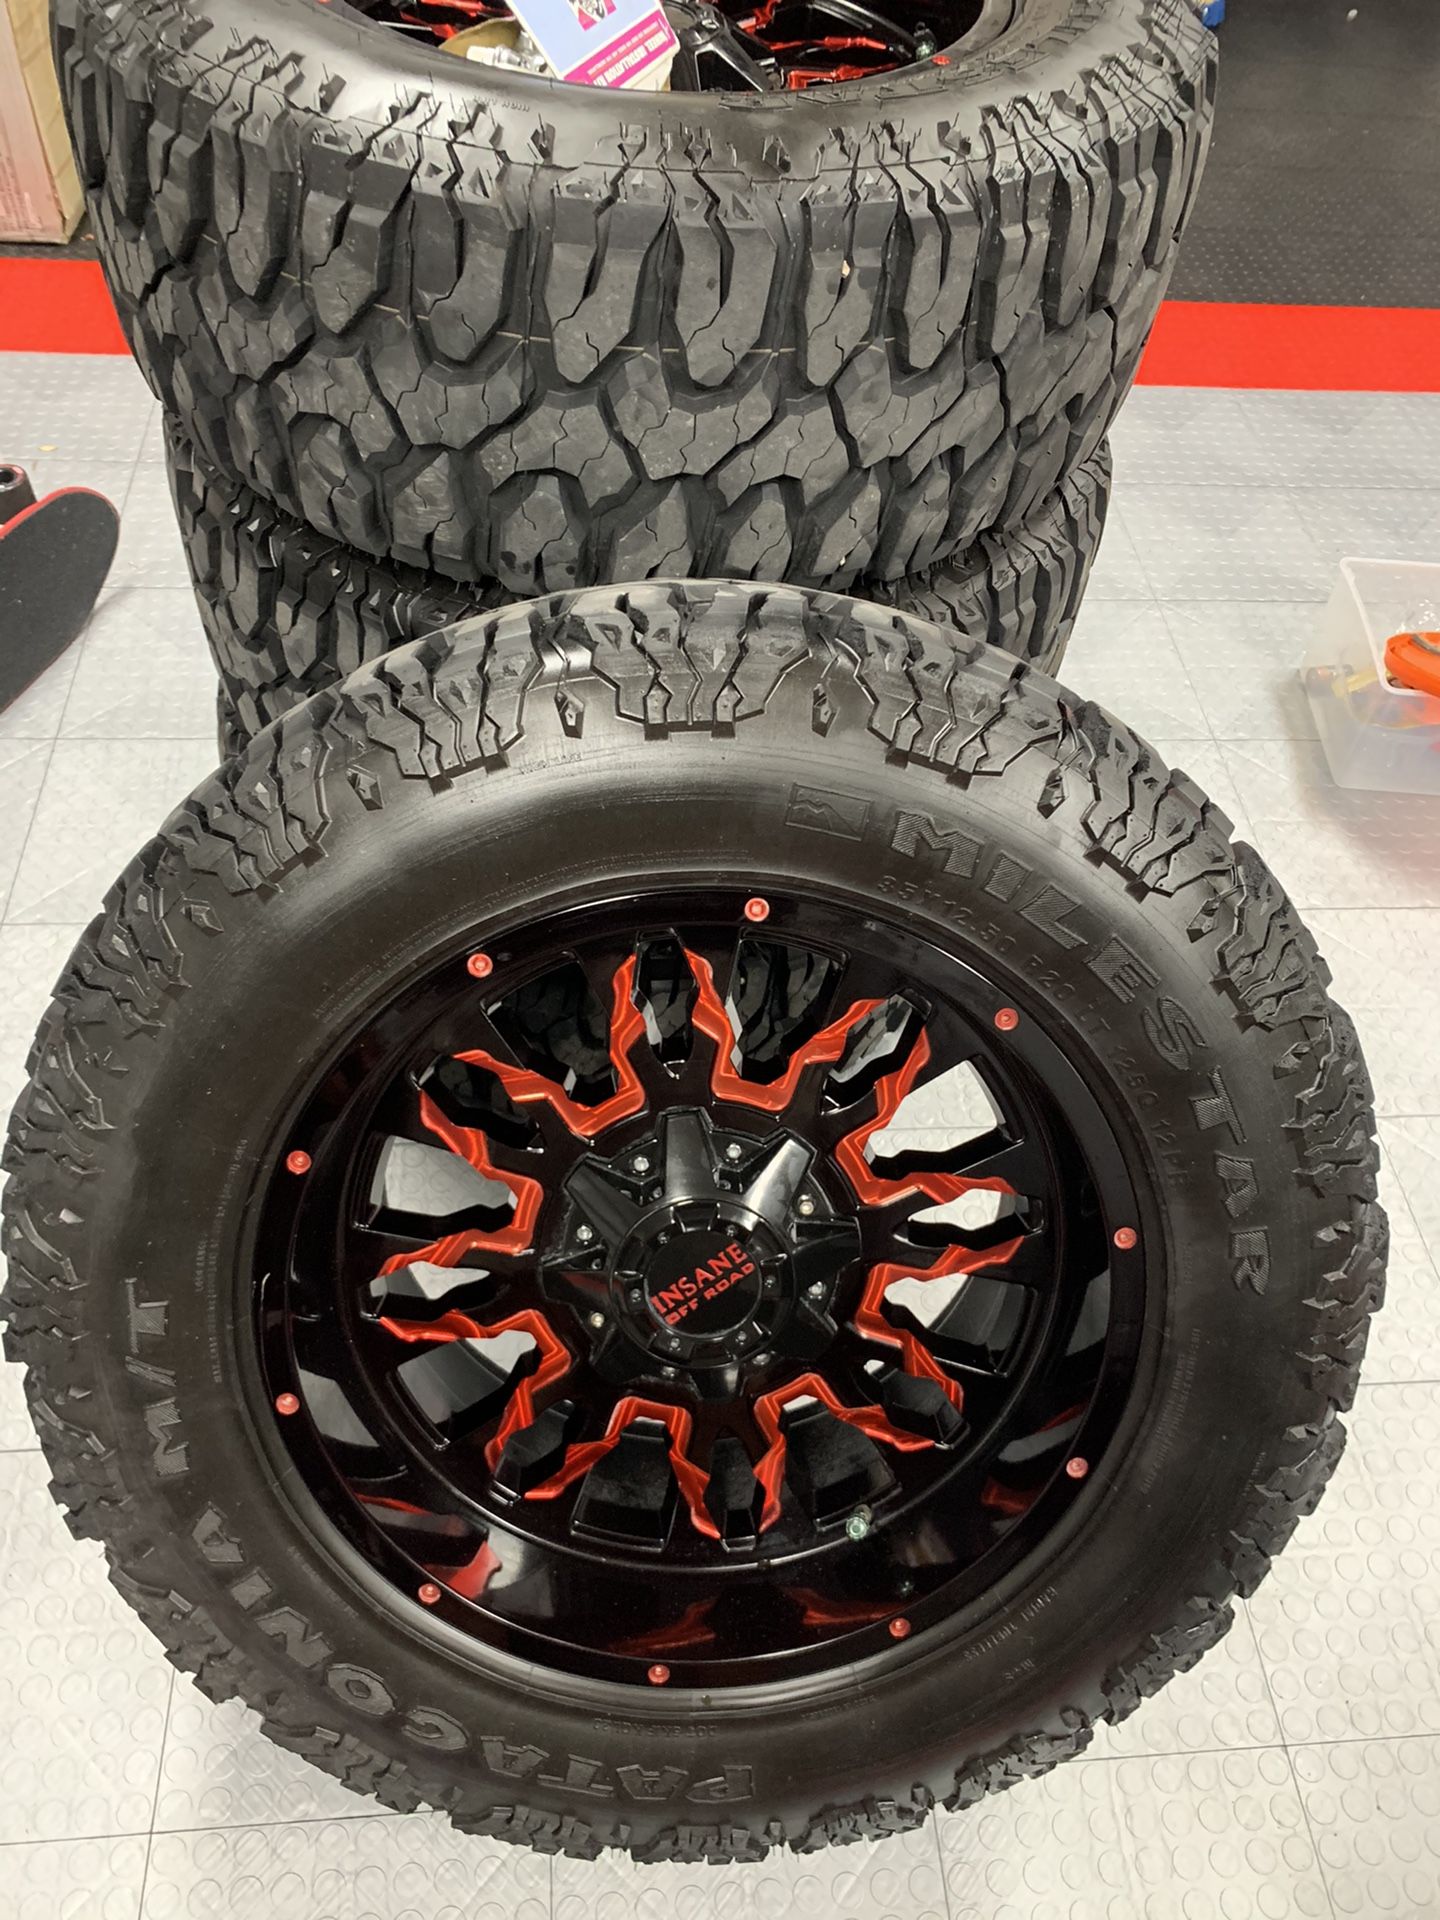 Jeep Wrangler mudding wheels and tires